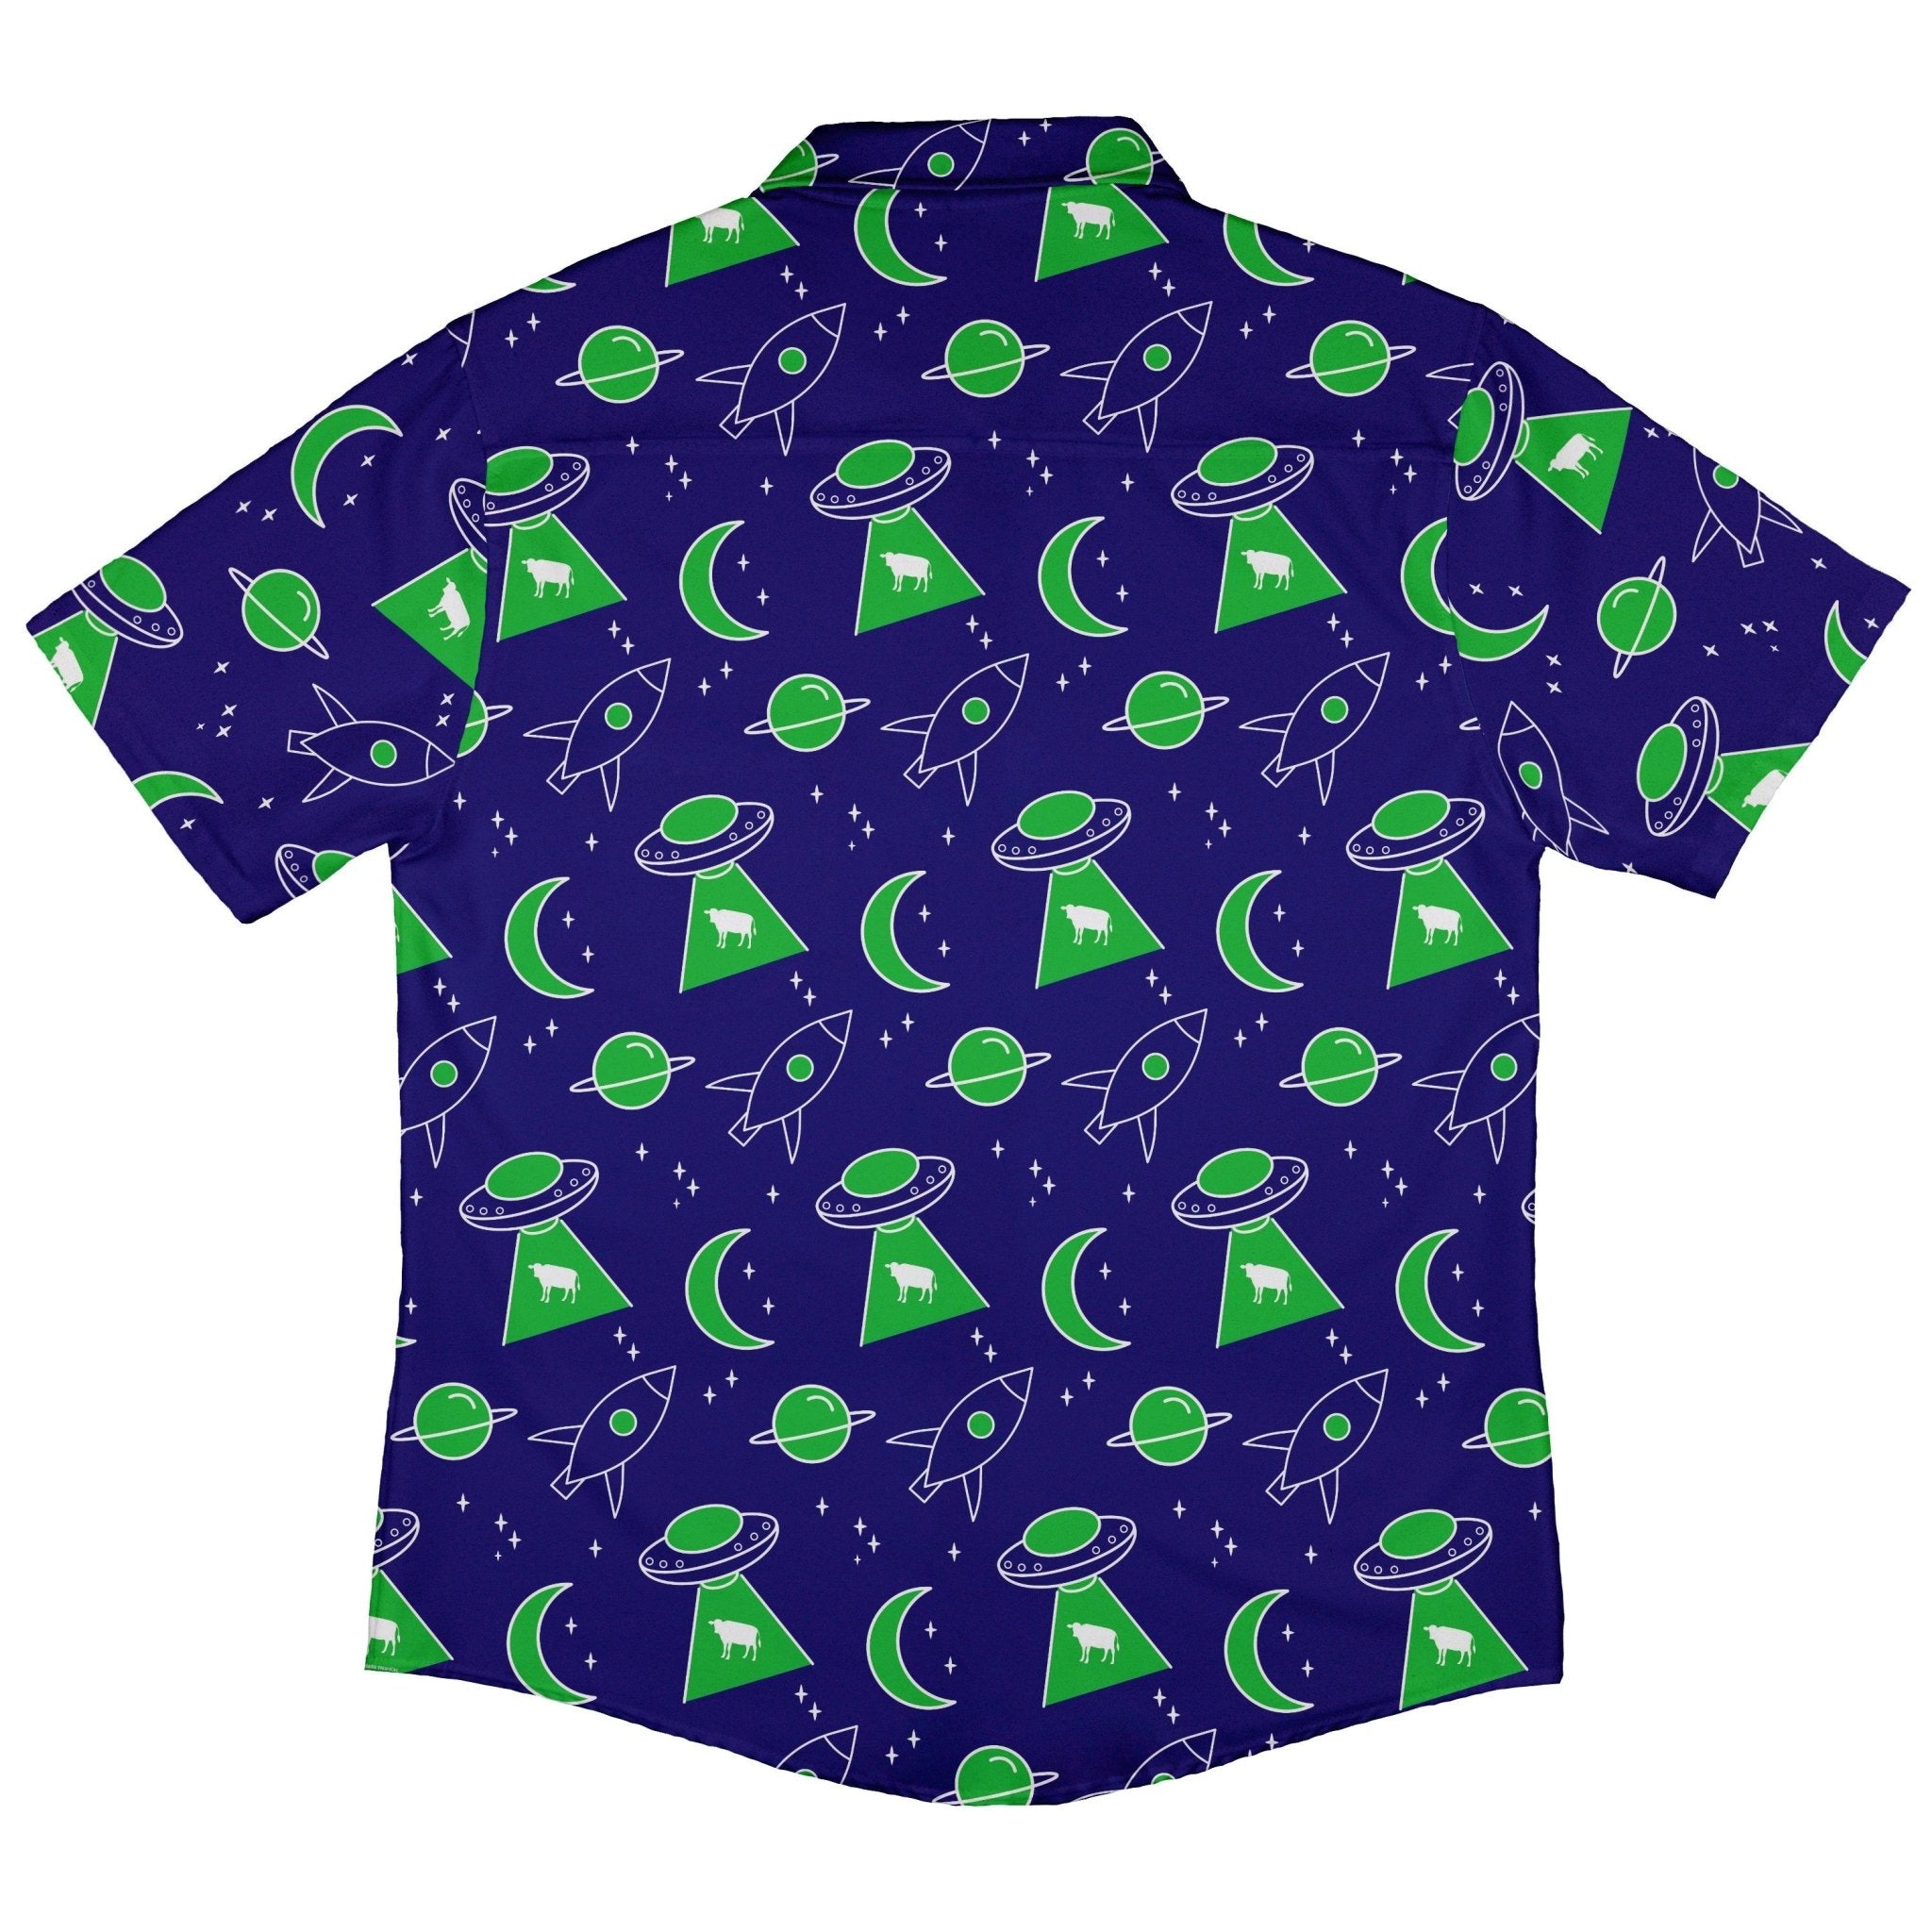 UFO Cow Abduction Button Up Shirt - adult sizing - Animal Patterns - Design by Heather Davenport